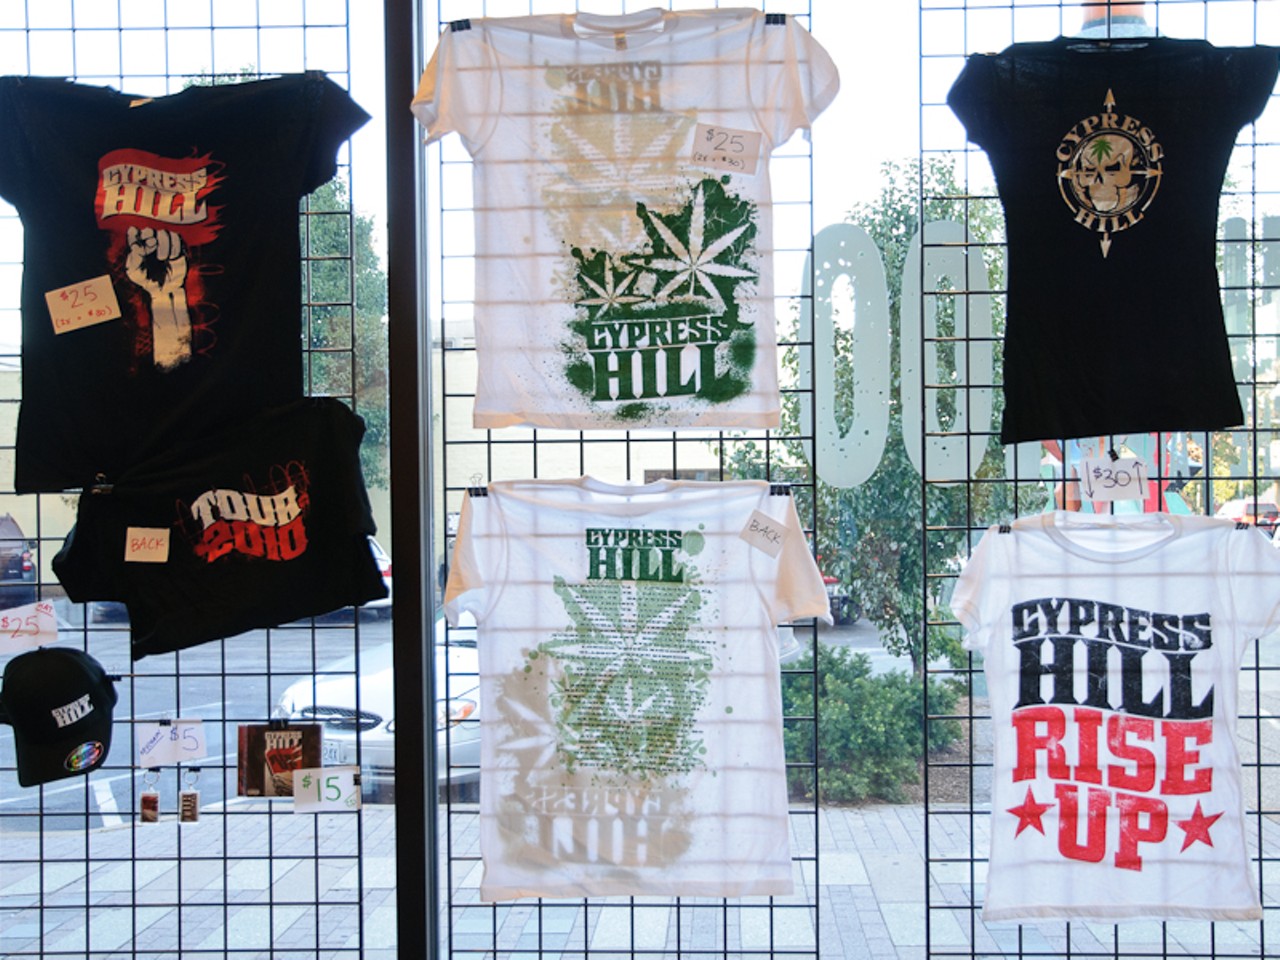 Cypress Hill merchandise at the Pageant.